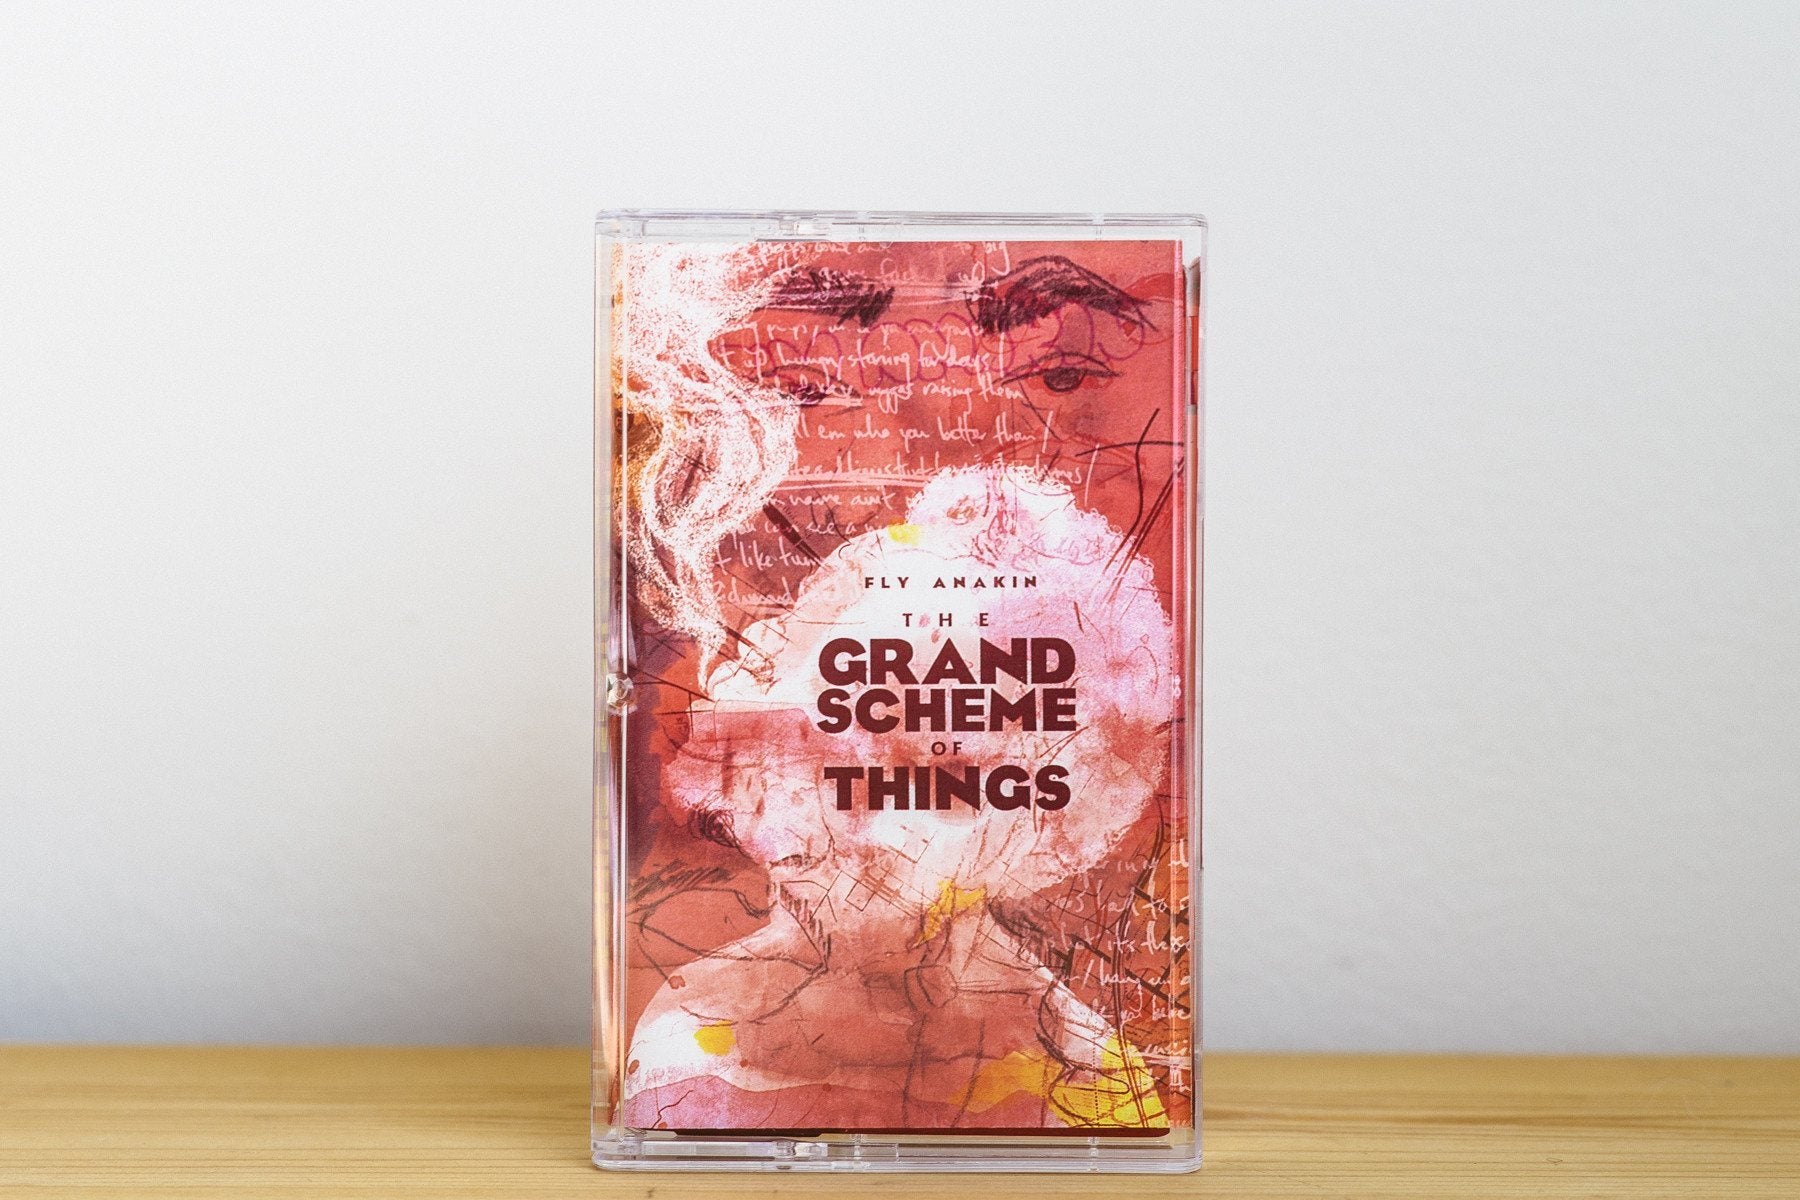 Fly Anakin - The Grand Scheme of Things - Inner Ocean Records